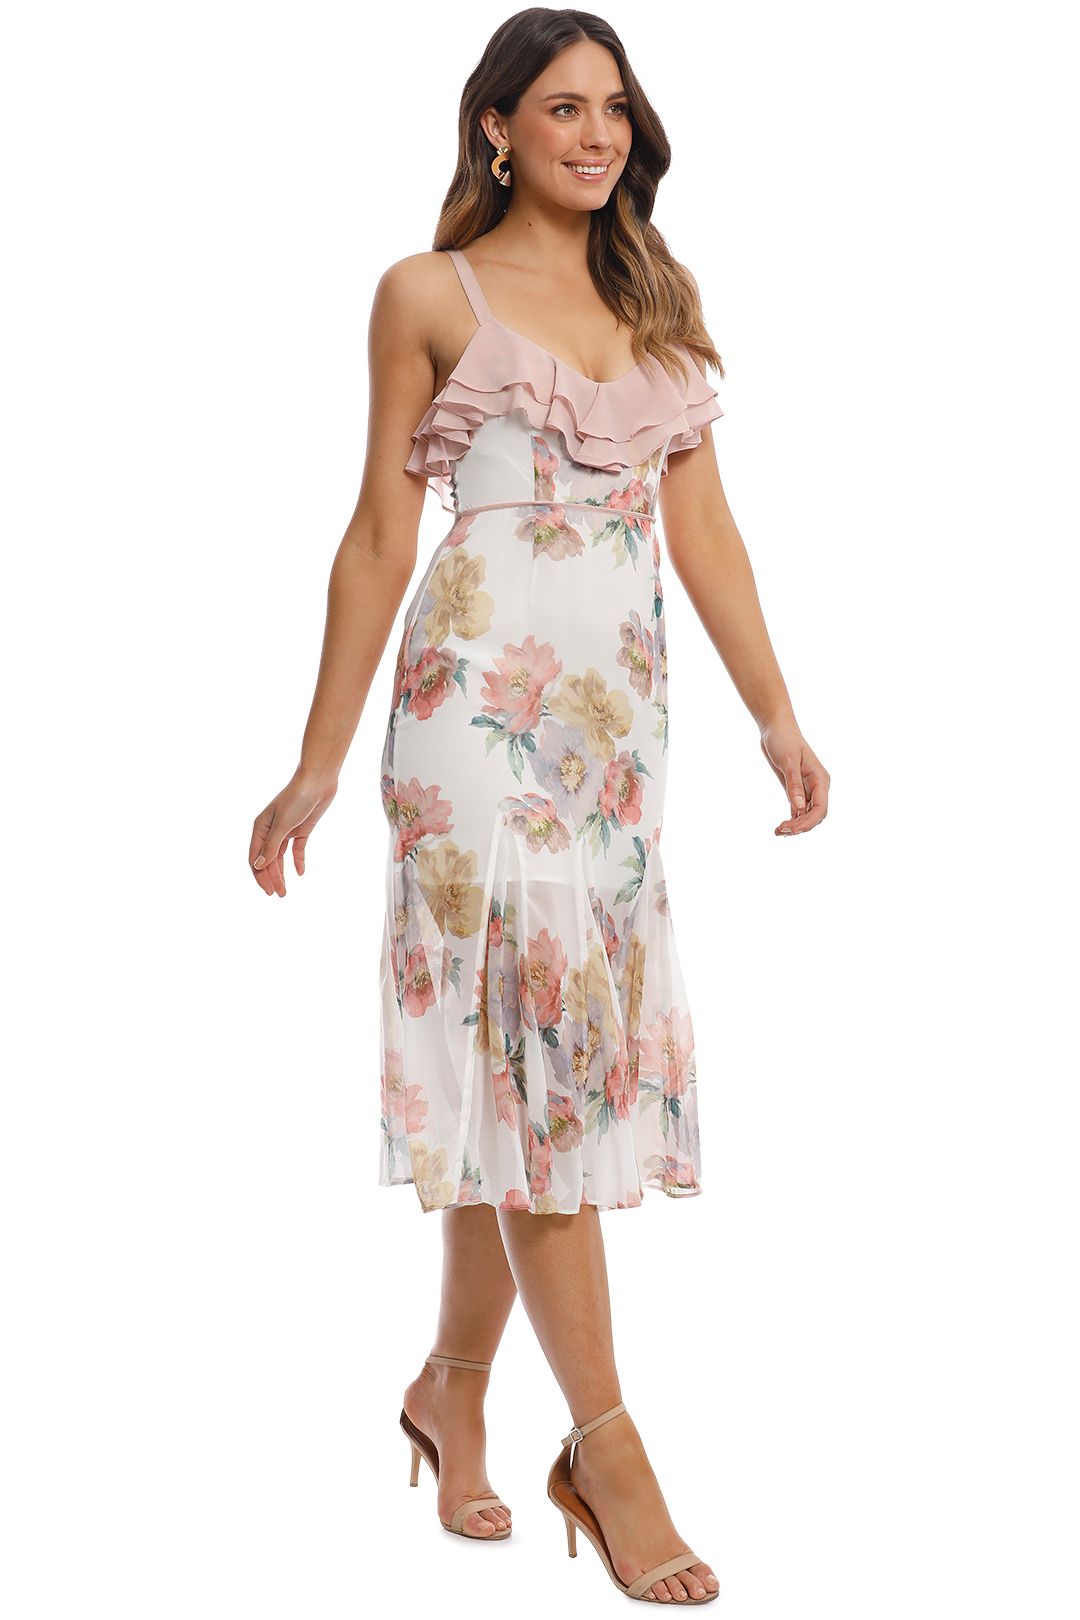 Talulah - Darcy Midi Dress - White Floral - Side